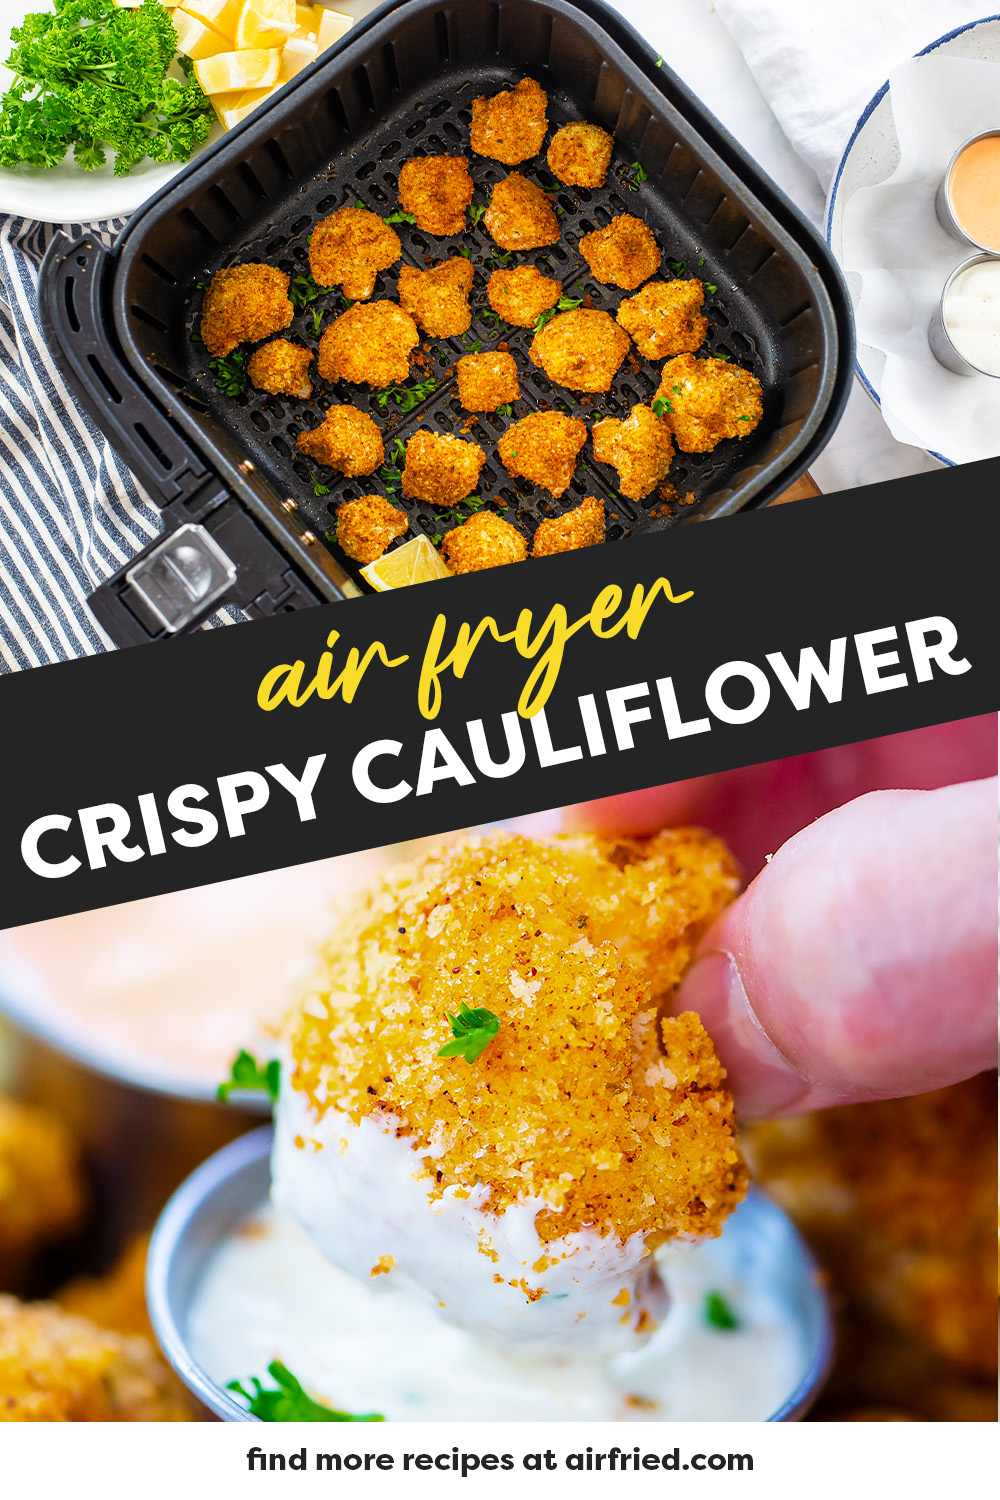 Our Air Fryer Breaded Cauliflower is coated with a simple, flavorful panko mixture, tossed in the air fryer, and cooked until crispy. Serve with your favorite dip and enjoy!